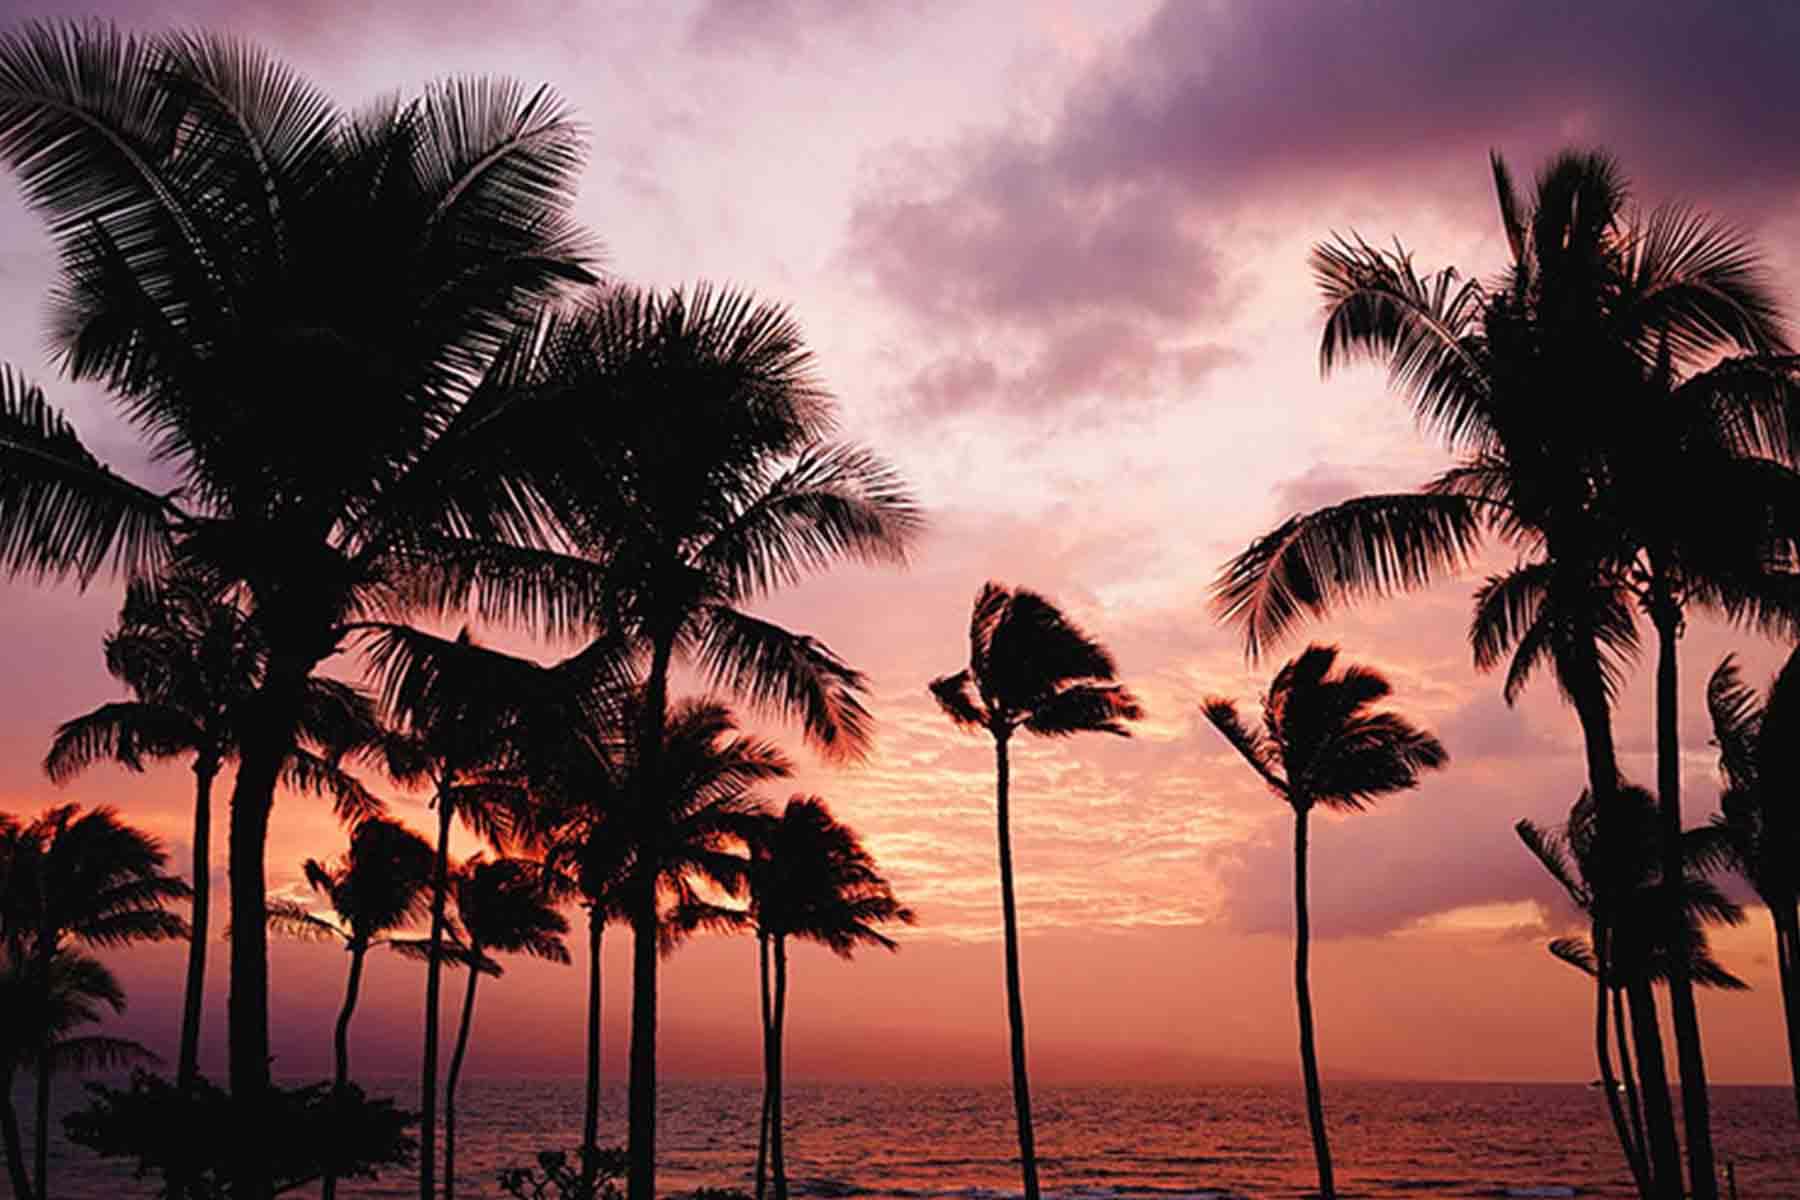 Palm trees on beach with purple sunset